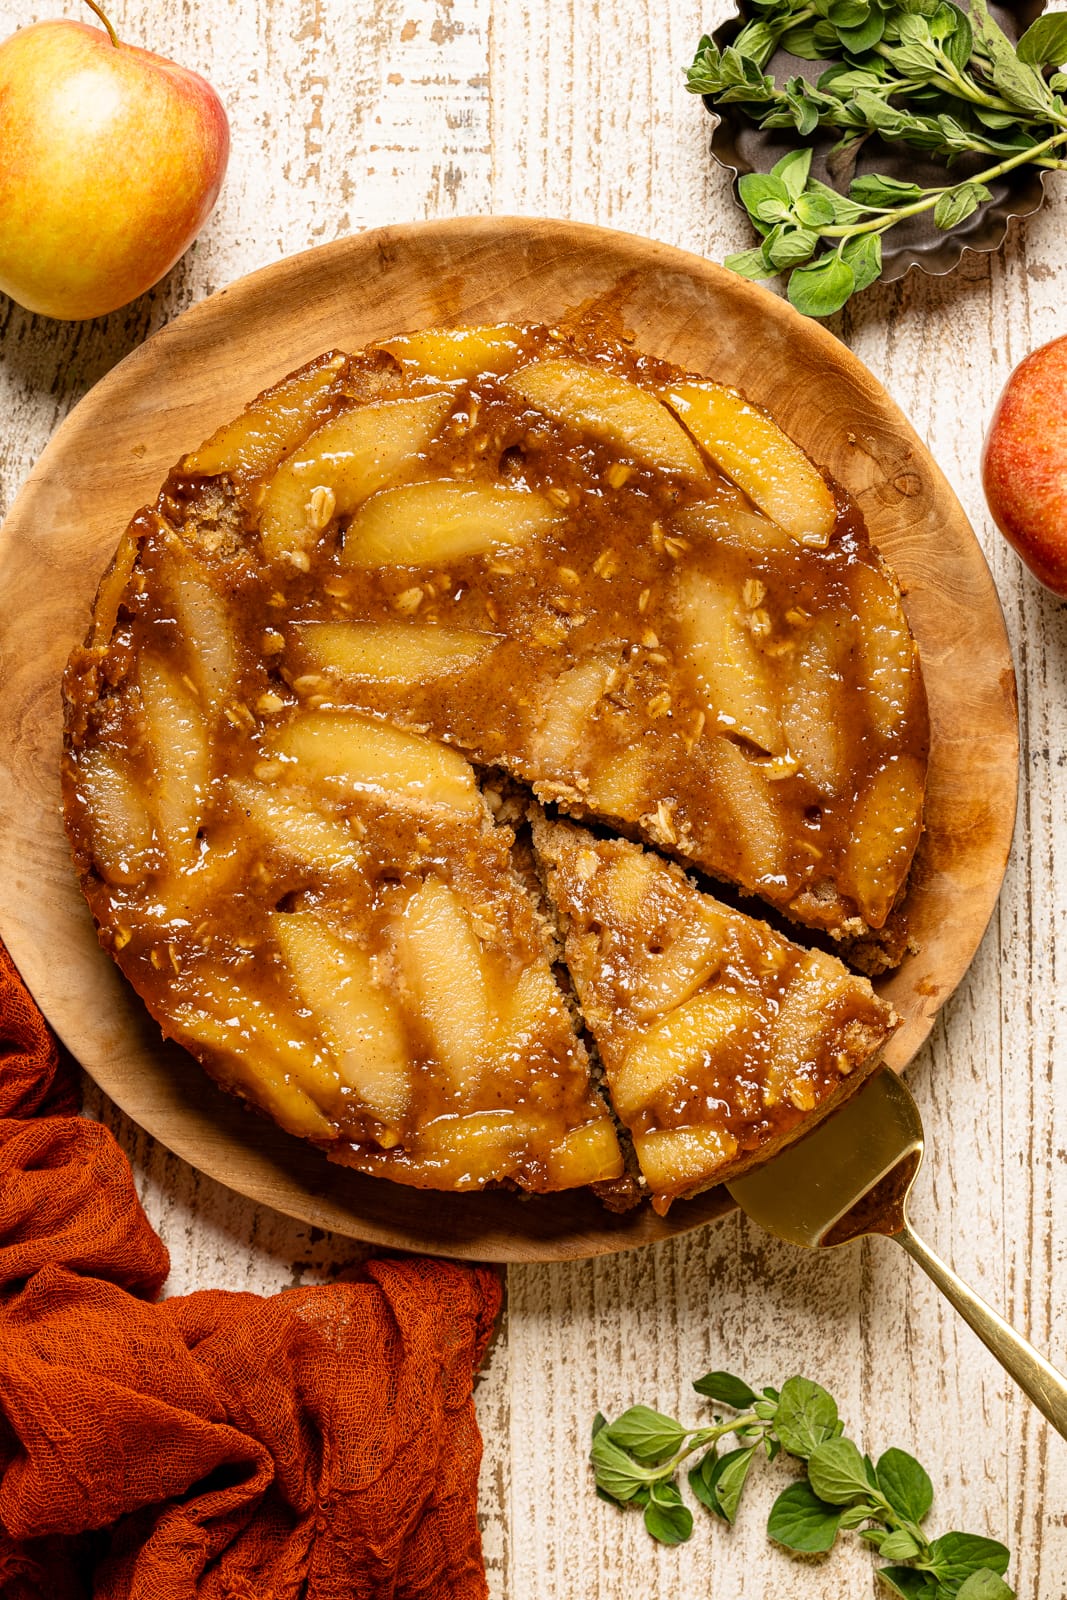 Upside down cake on a wood platter with apples.